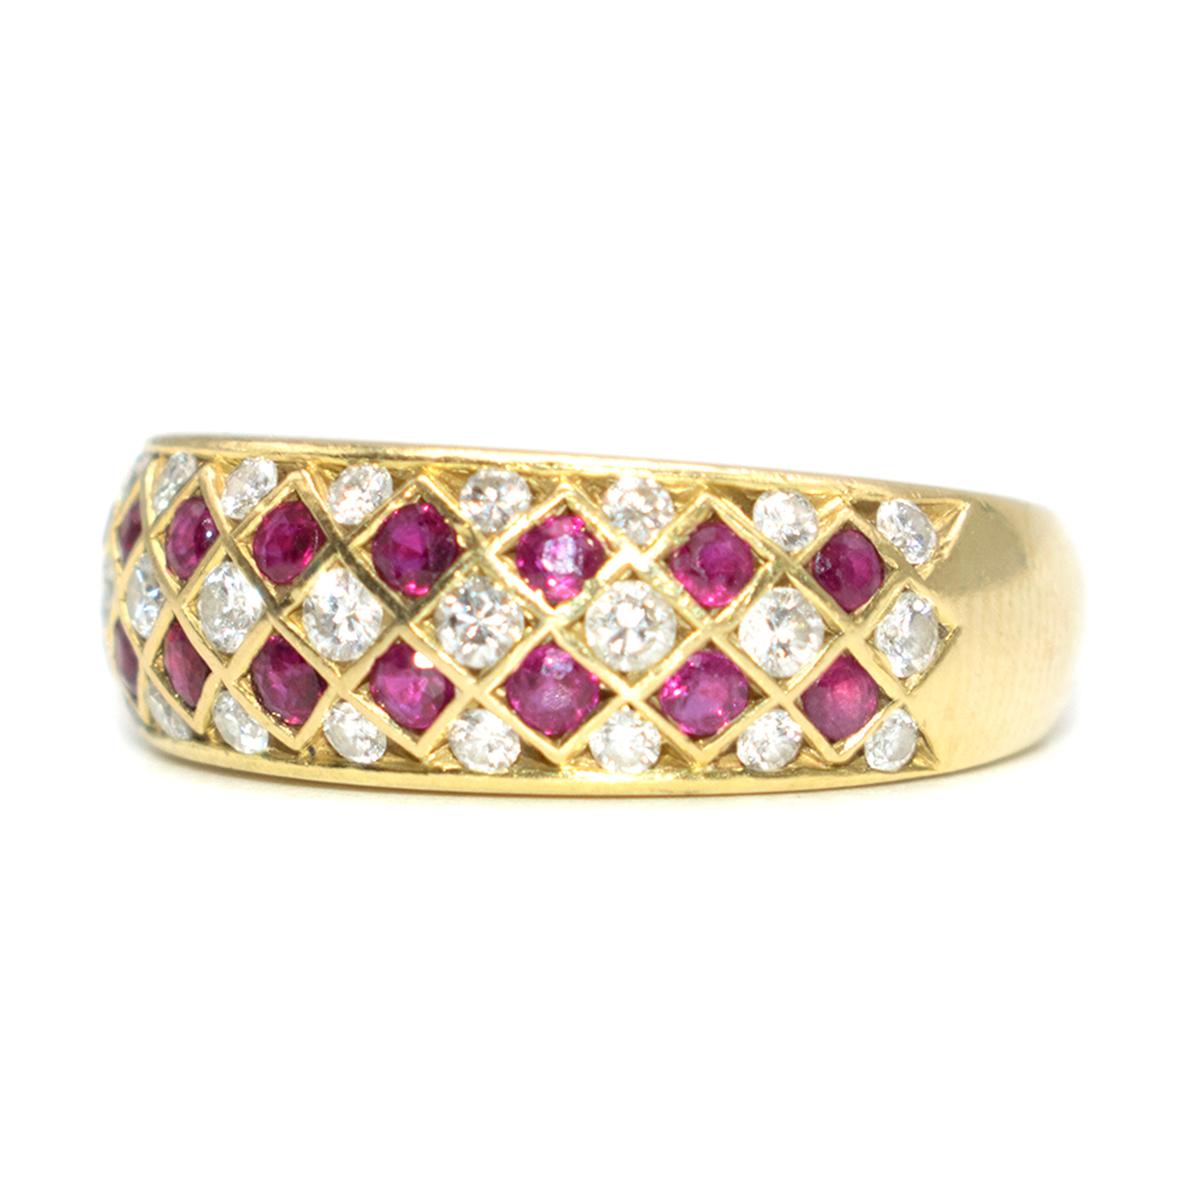 Bespoke Ruby and Diamond 18k Gold Ring

- 18k Gold band - solid weight 
- Ruby and Diamond encrusted eternity design  
- Raised face
- Weight - 7.7g
- Estimated ring size 6. 

Please note, these items are pre-owned and may show some signs of